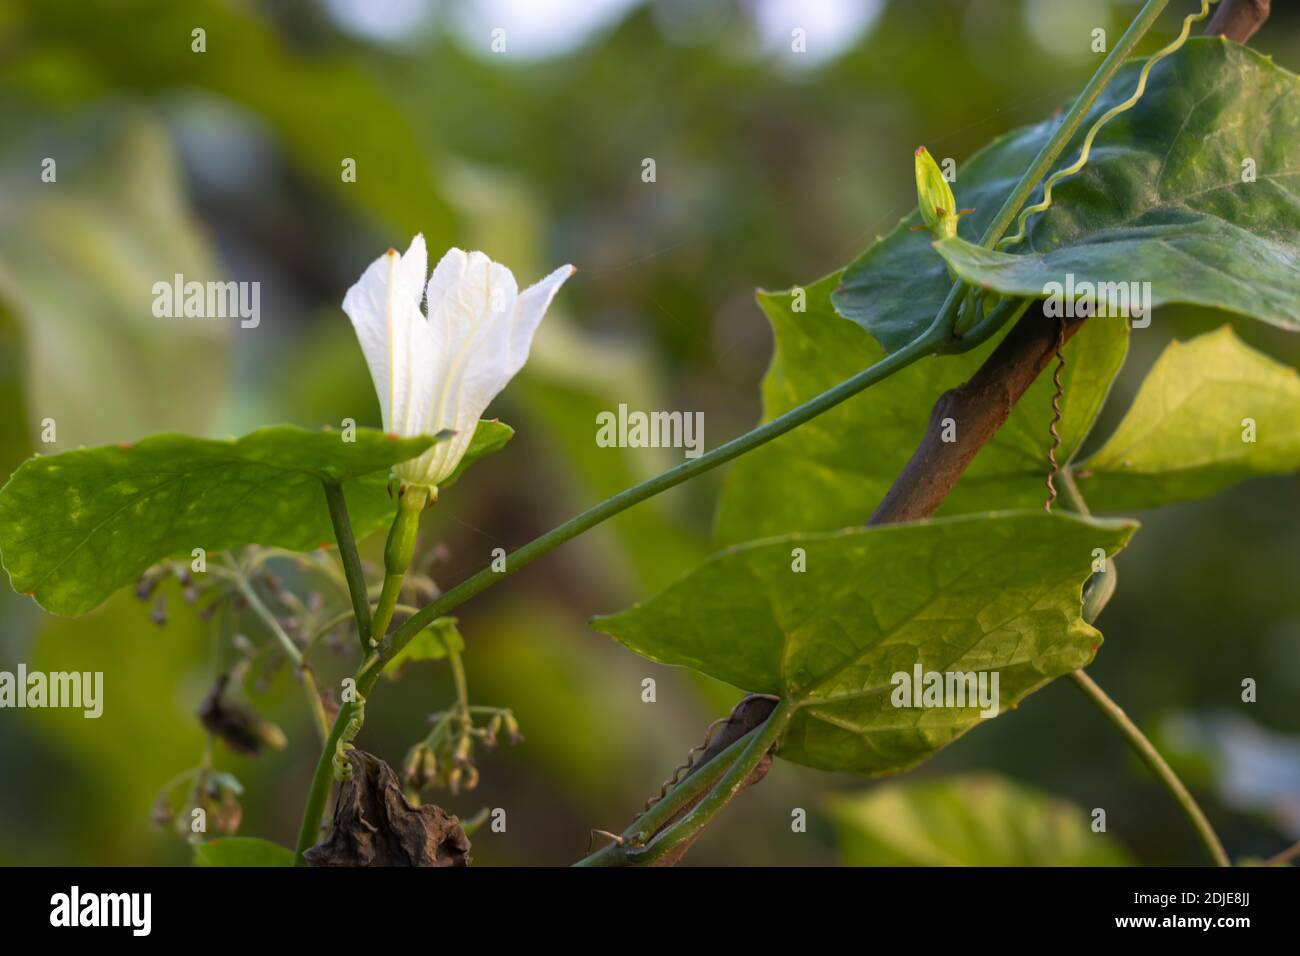 Ivy gourd bloomed white flower with green leaves in the jungle Stock Photo